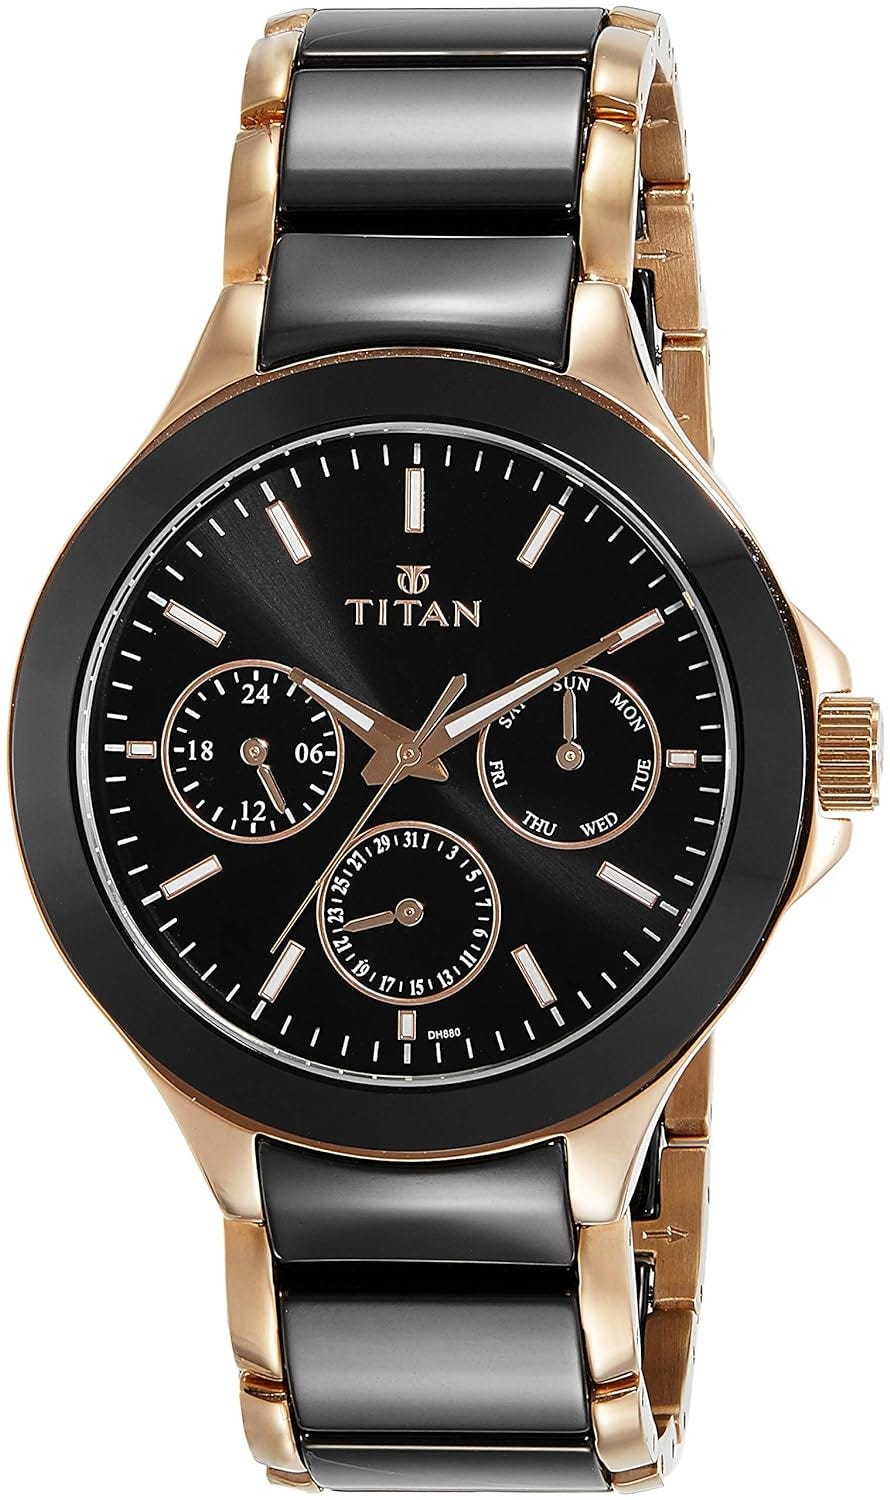 How to Check the Original Titan Watches ad on titan watch